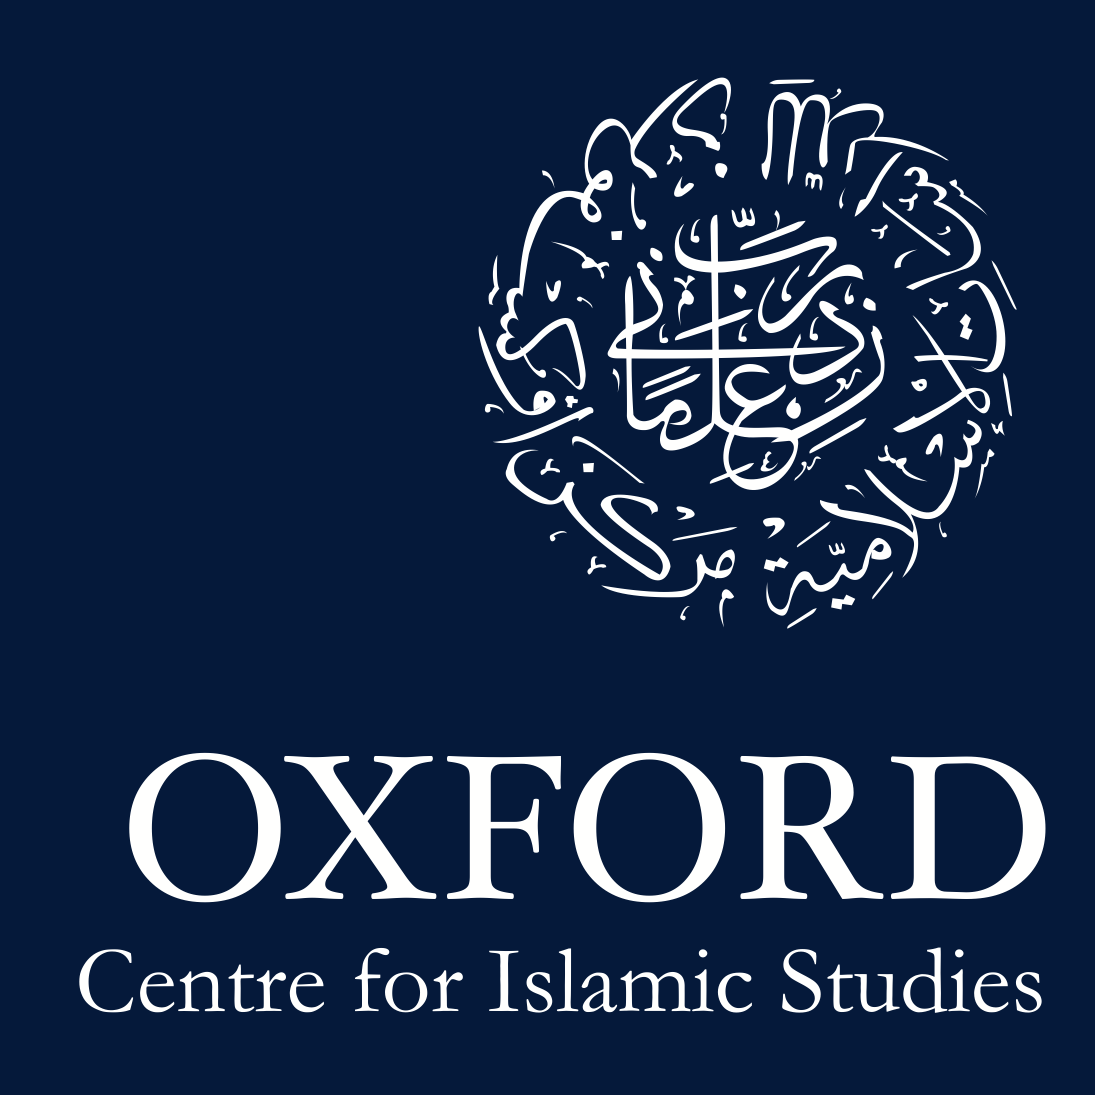 Human Dignity in the Islamic Tradition – Society